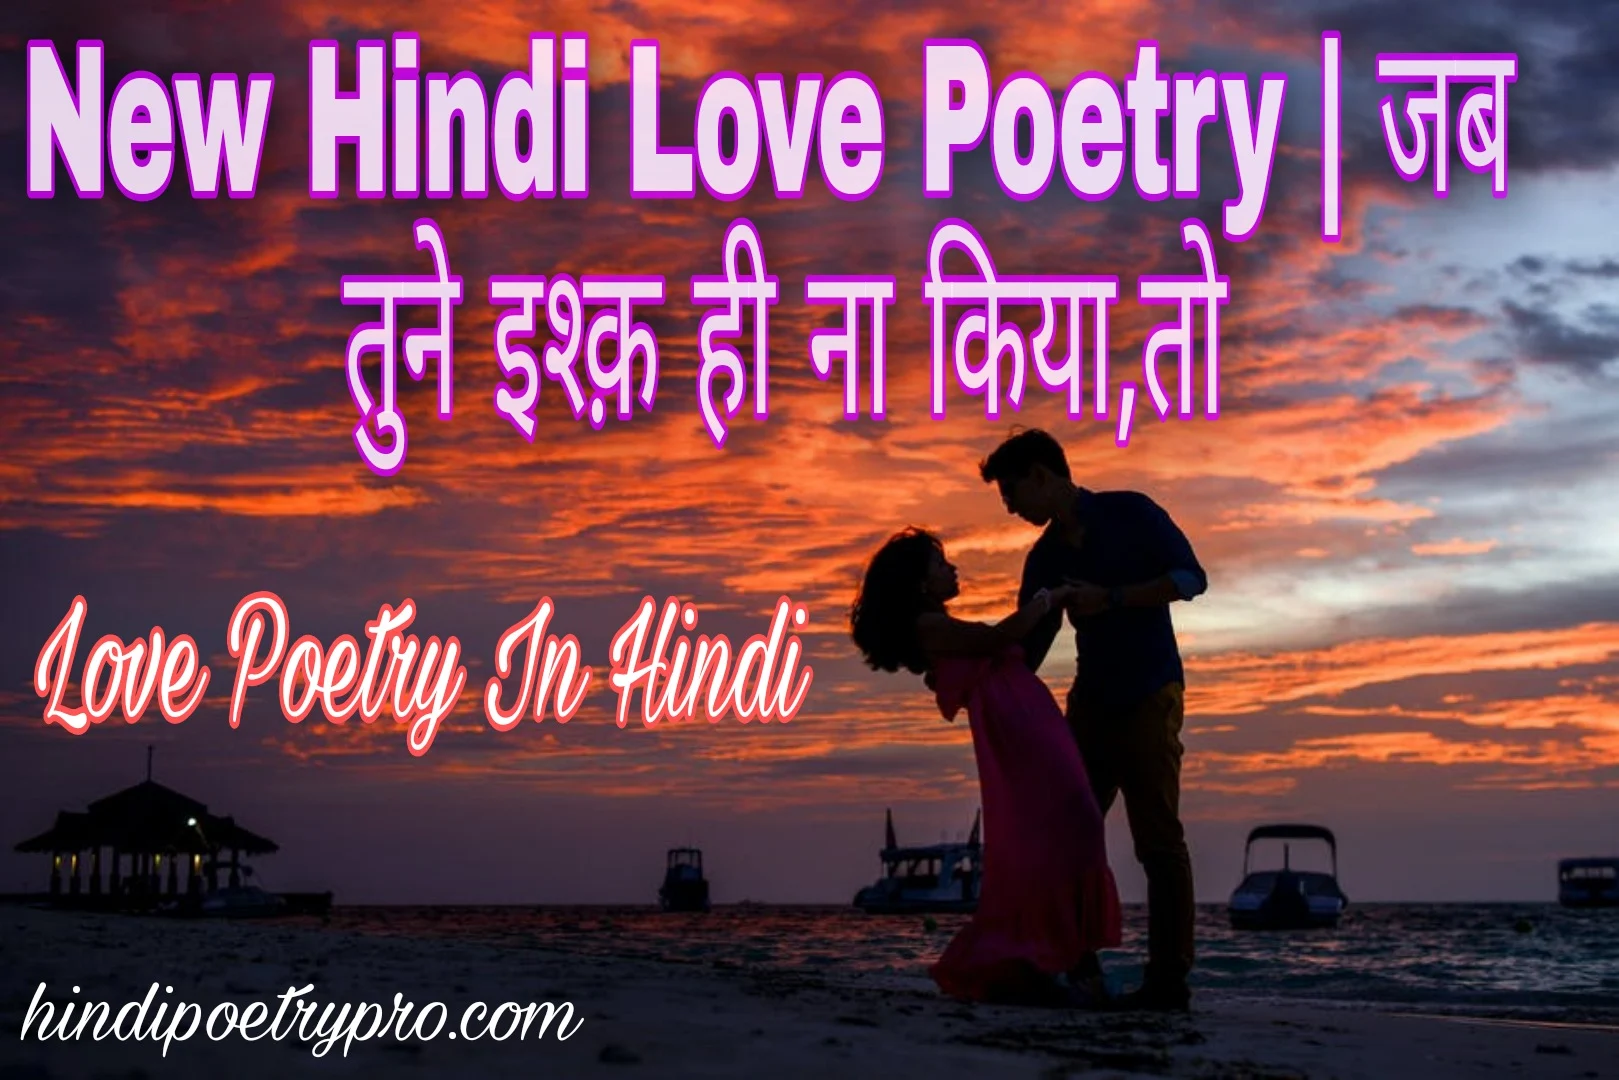 Heart Touching Poetry,Heart Touching Sad Poetry in Hindi,Heart touching Poetry Lines ,Heart touching Poem Meaning in Hindi,Heart touching short poem